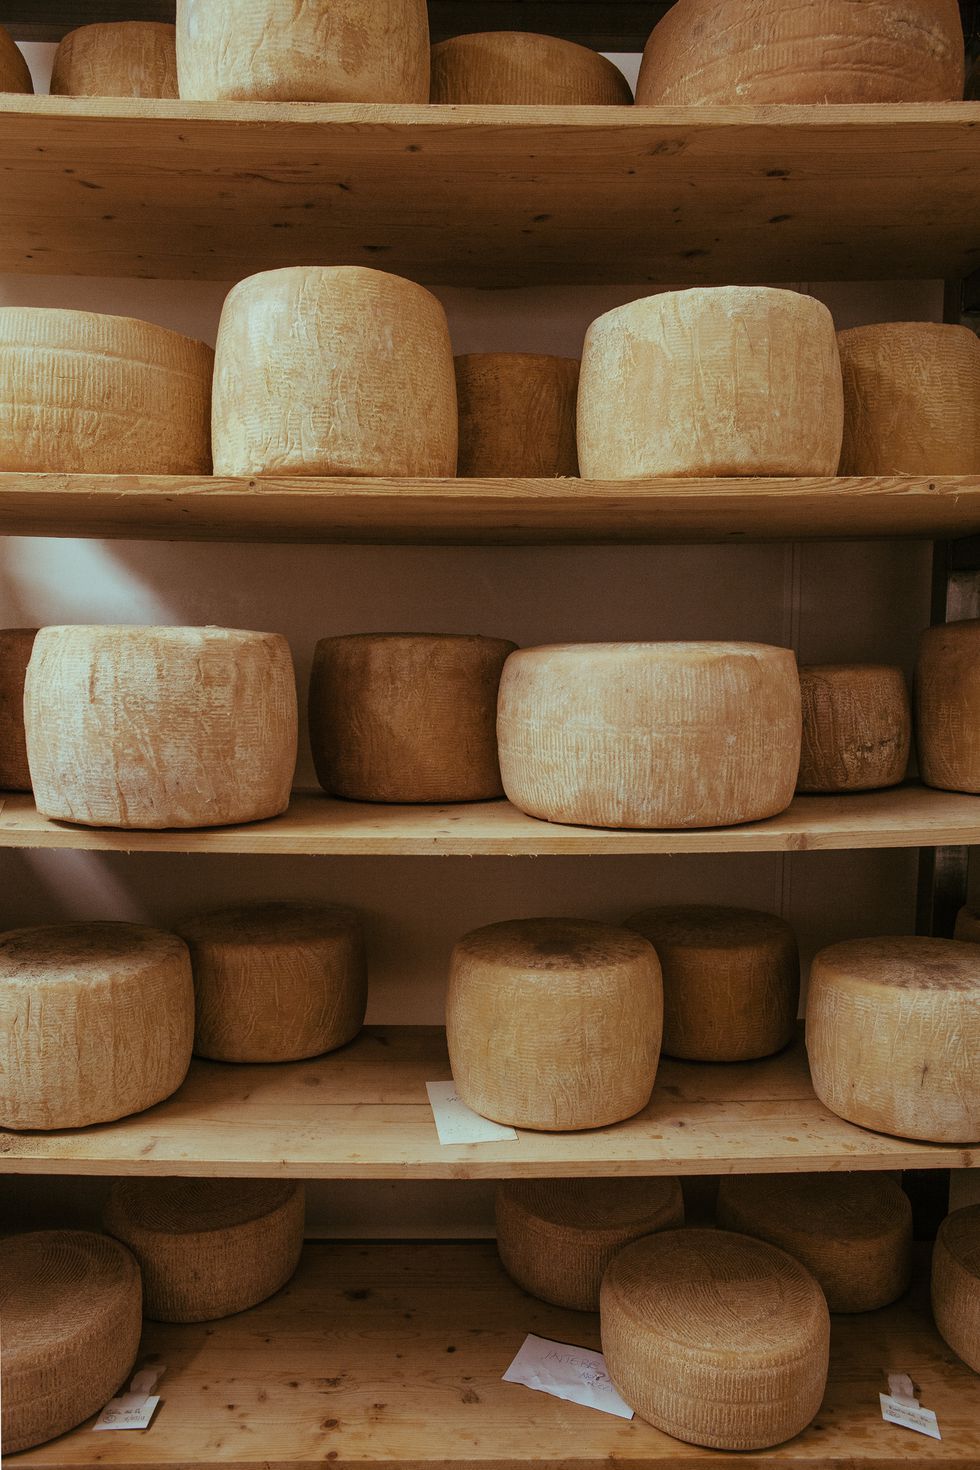 earthenware, Dairy, Gruyère cheese, Pottery, Wood, Cheese, Cheesemaking, Parmigiano-reggiano, Tableware, Bowl, 